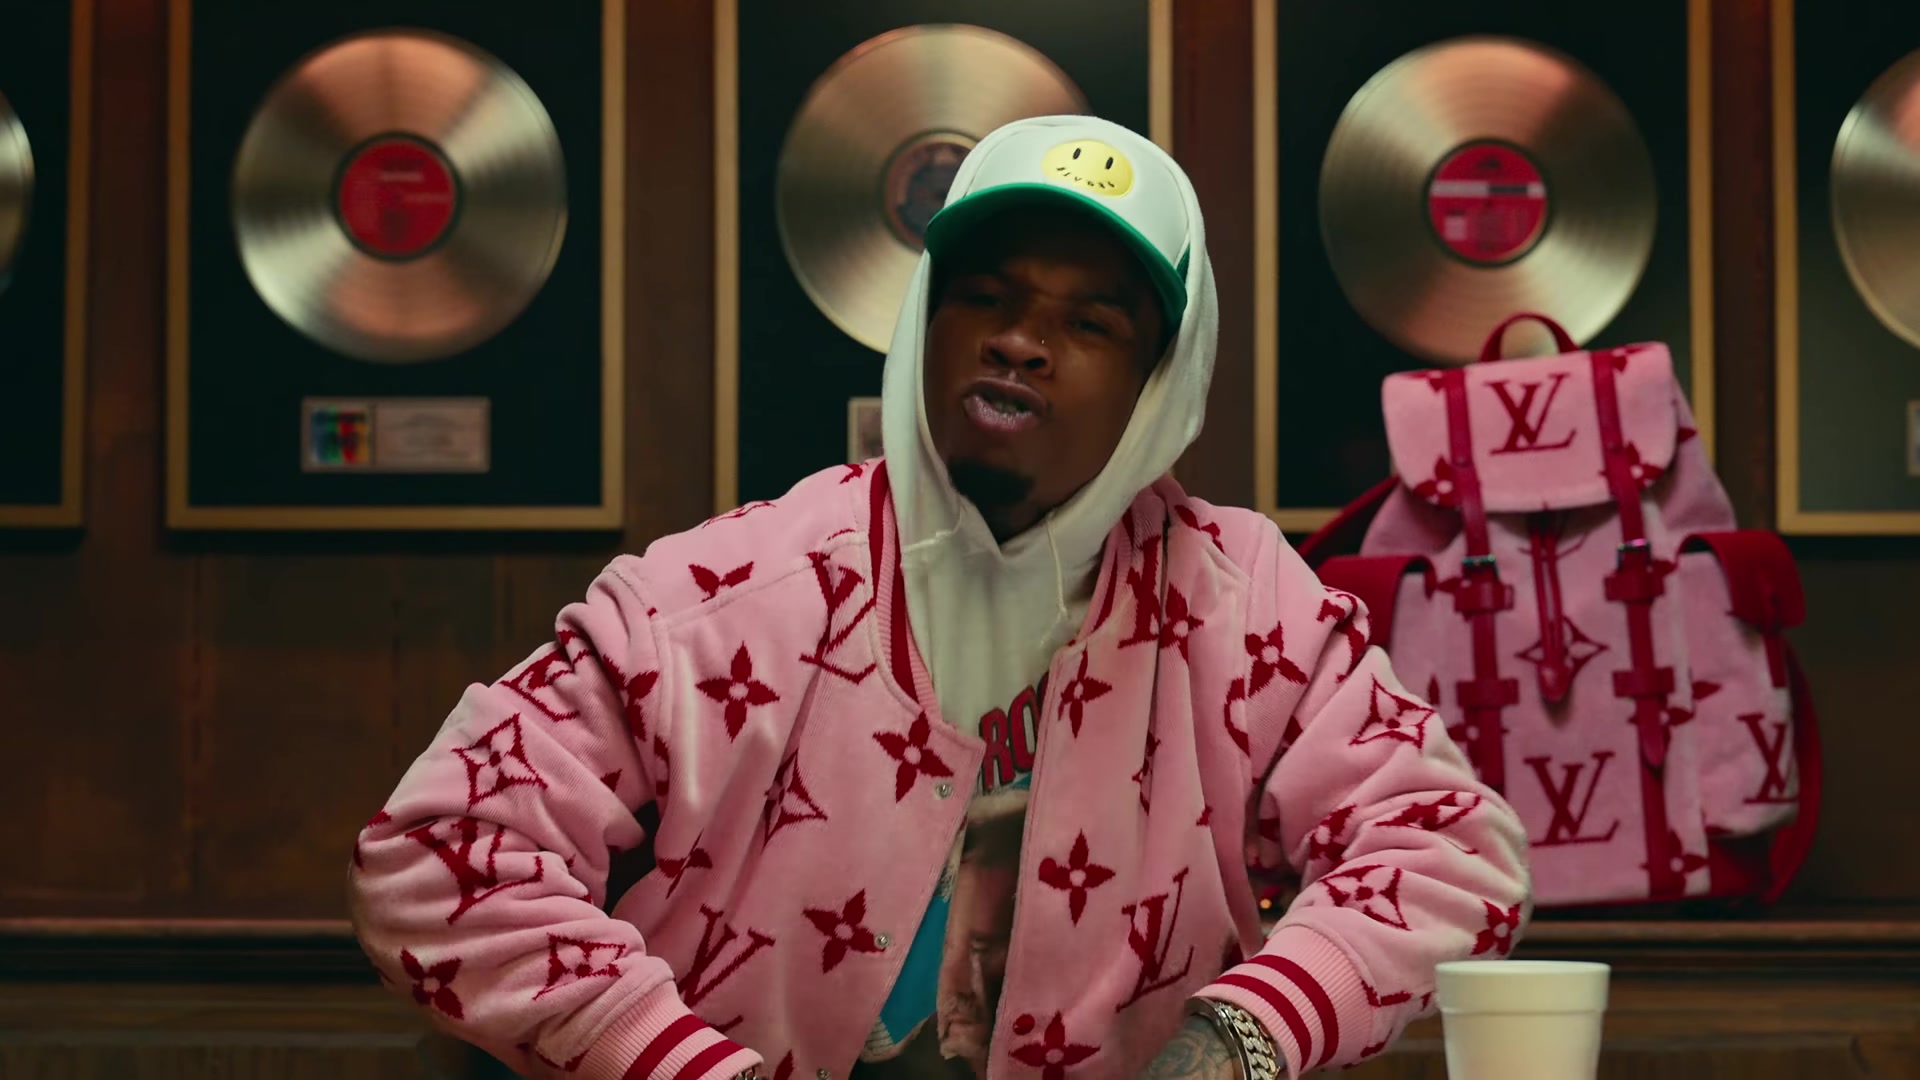 Louis Vuitton Pink Jacket And Backpack Of Tory Lanez In Most High (2020)